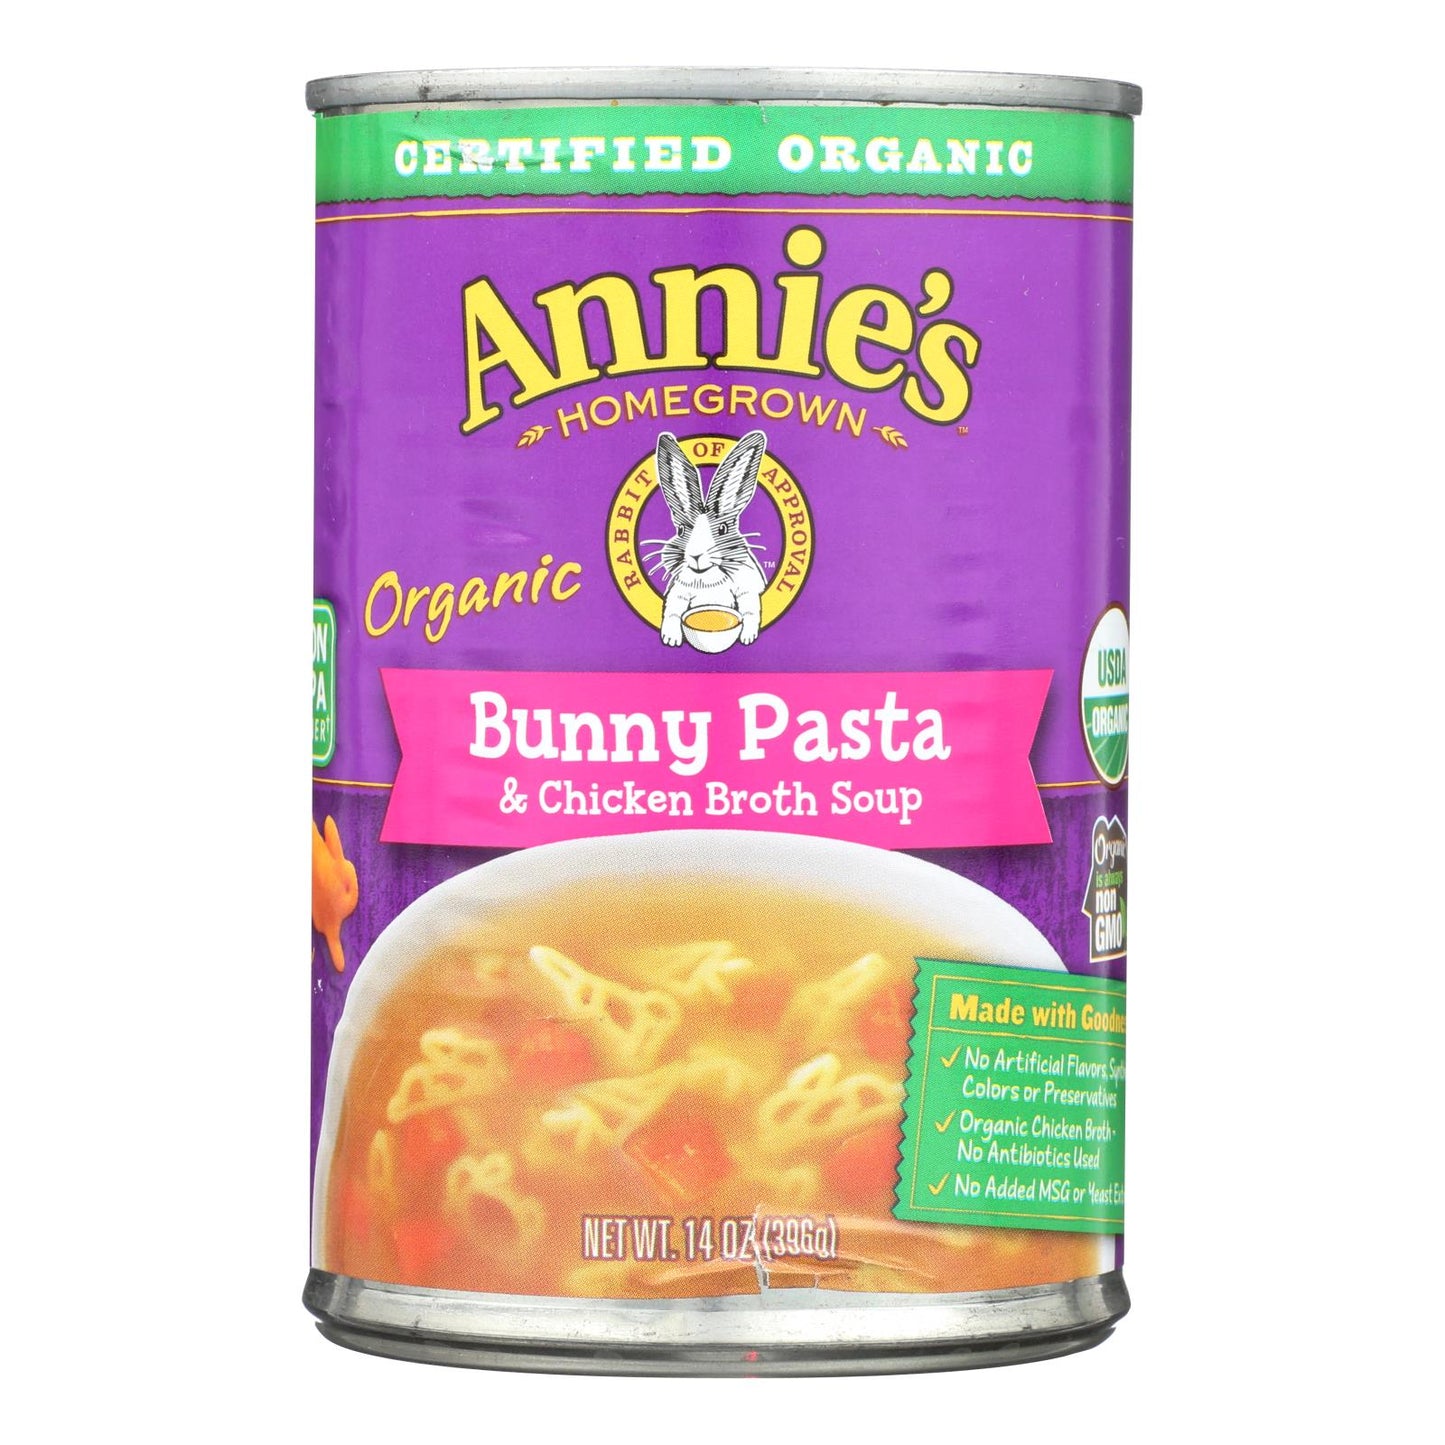 Annie's Homegrown - Soup - Bunny Pasta And Chicken Broth Soup - Case Of 8 - 14 Oz.